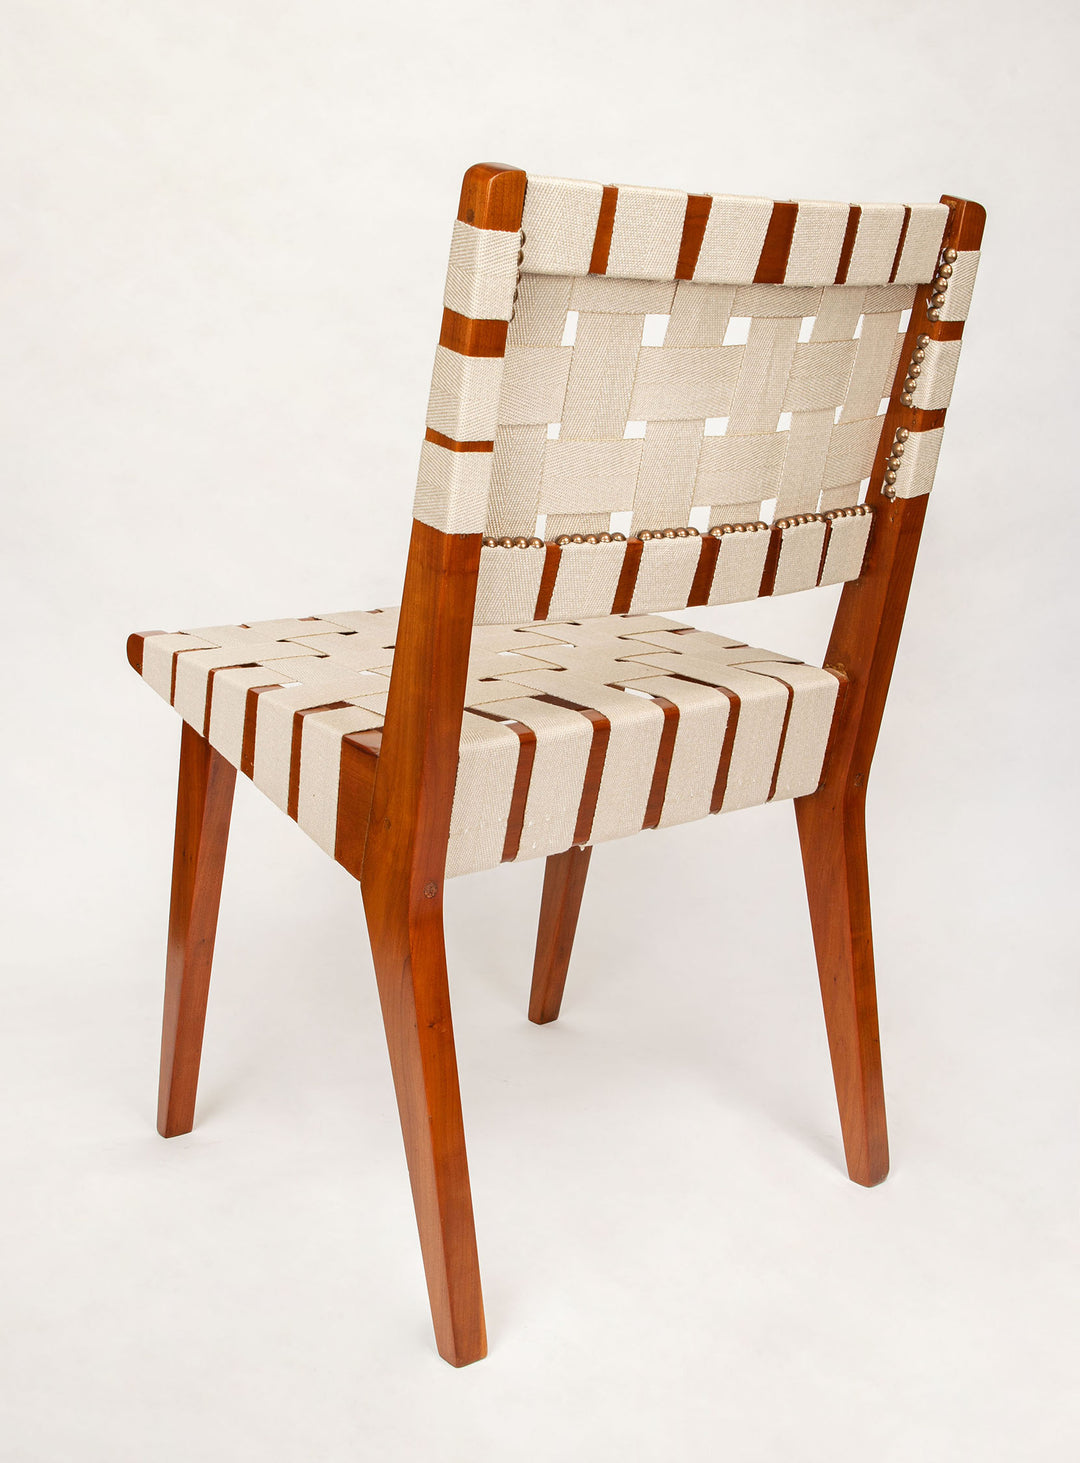 Classic Jens Risom Mid-Century Teak Woven Side Chairs (Pair)